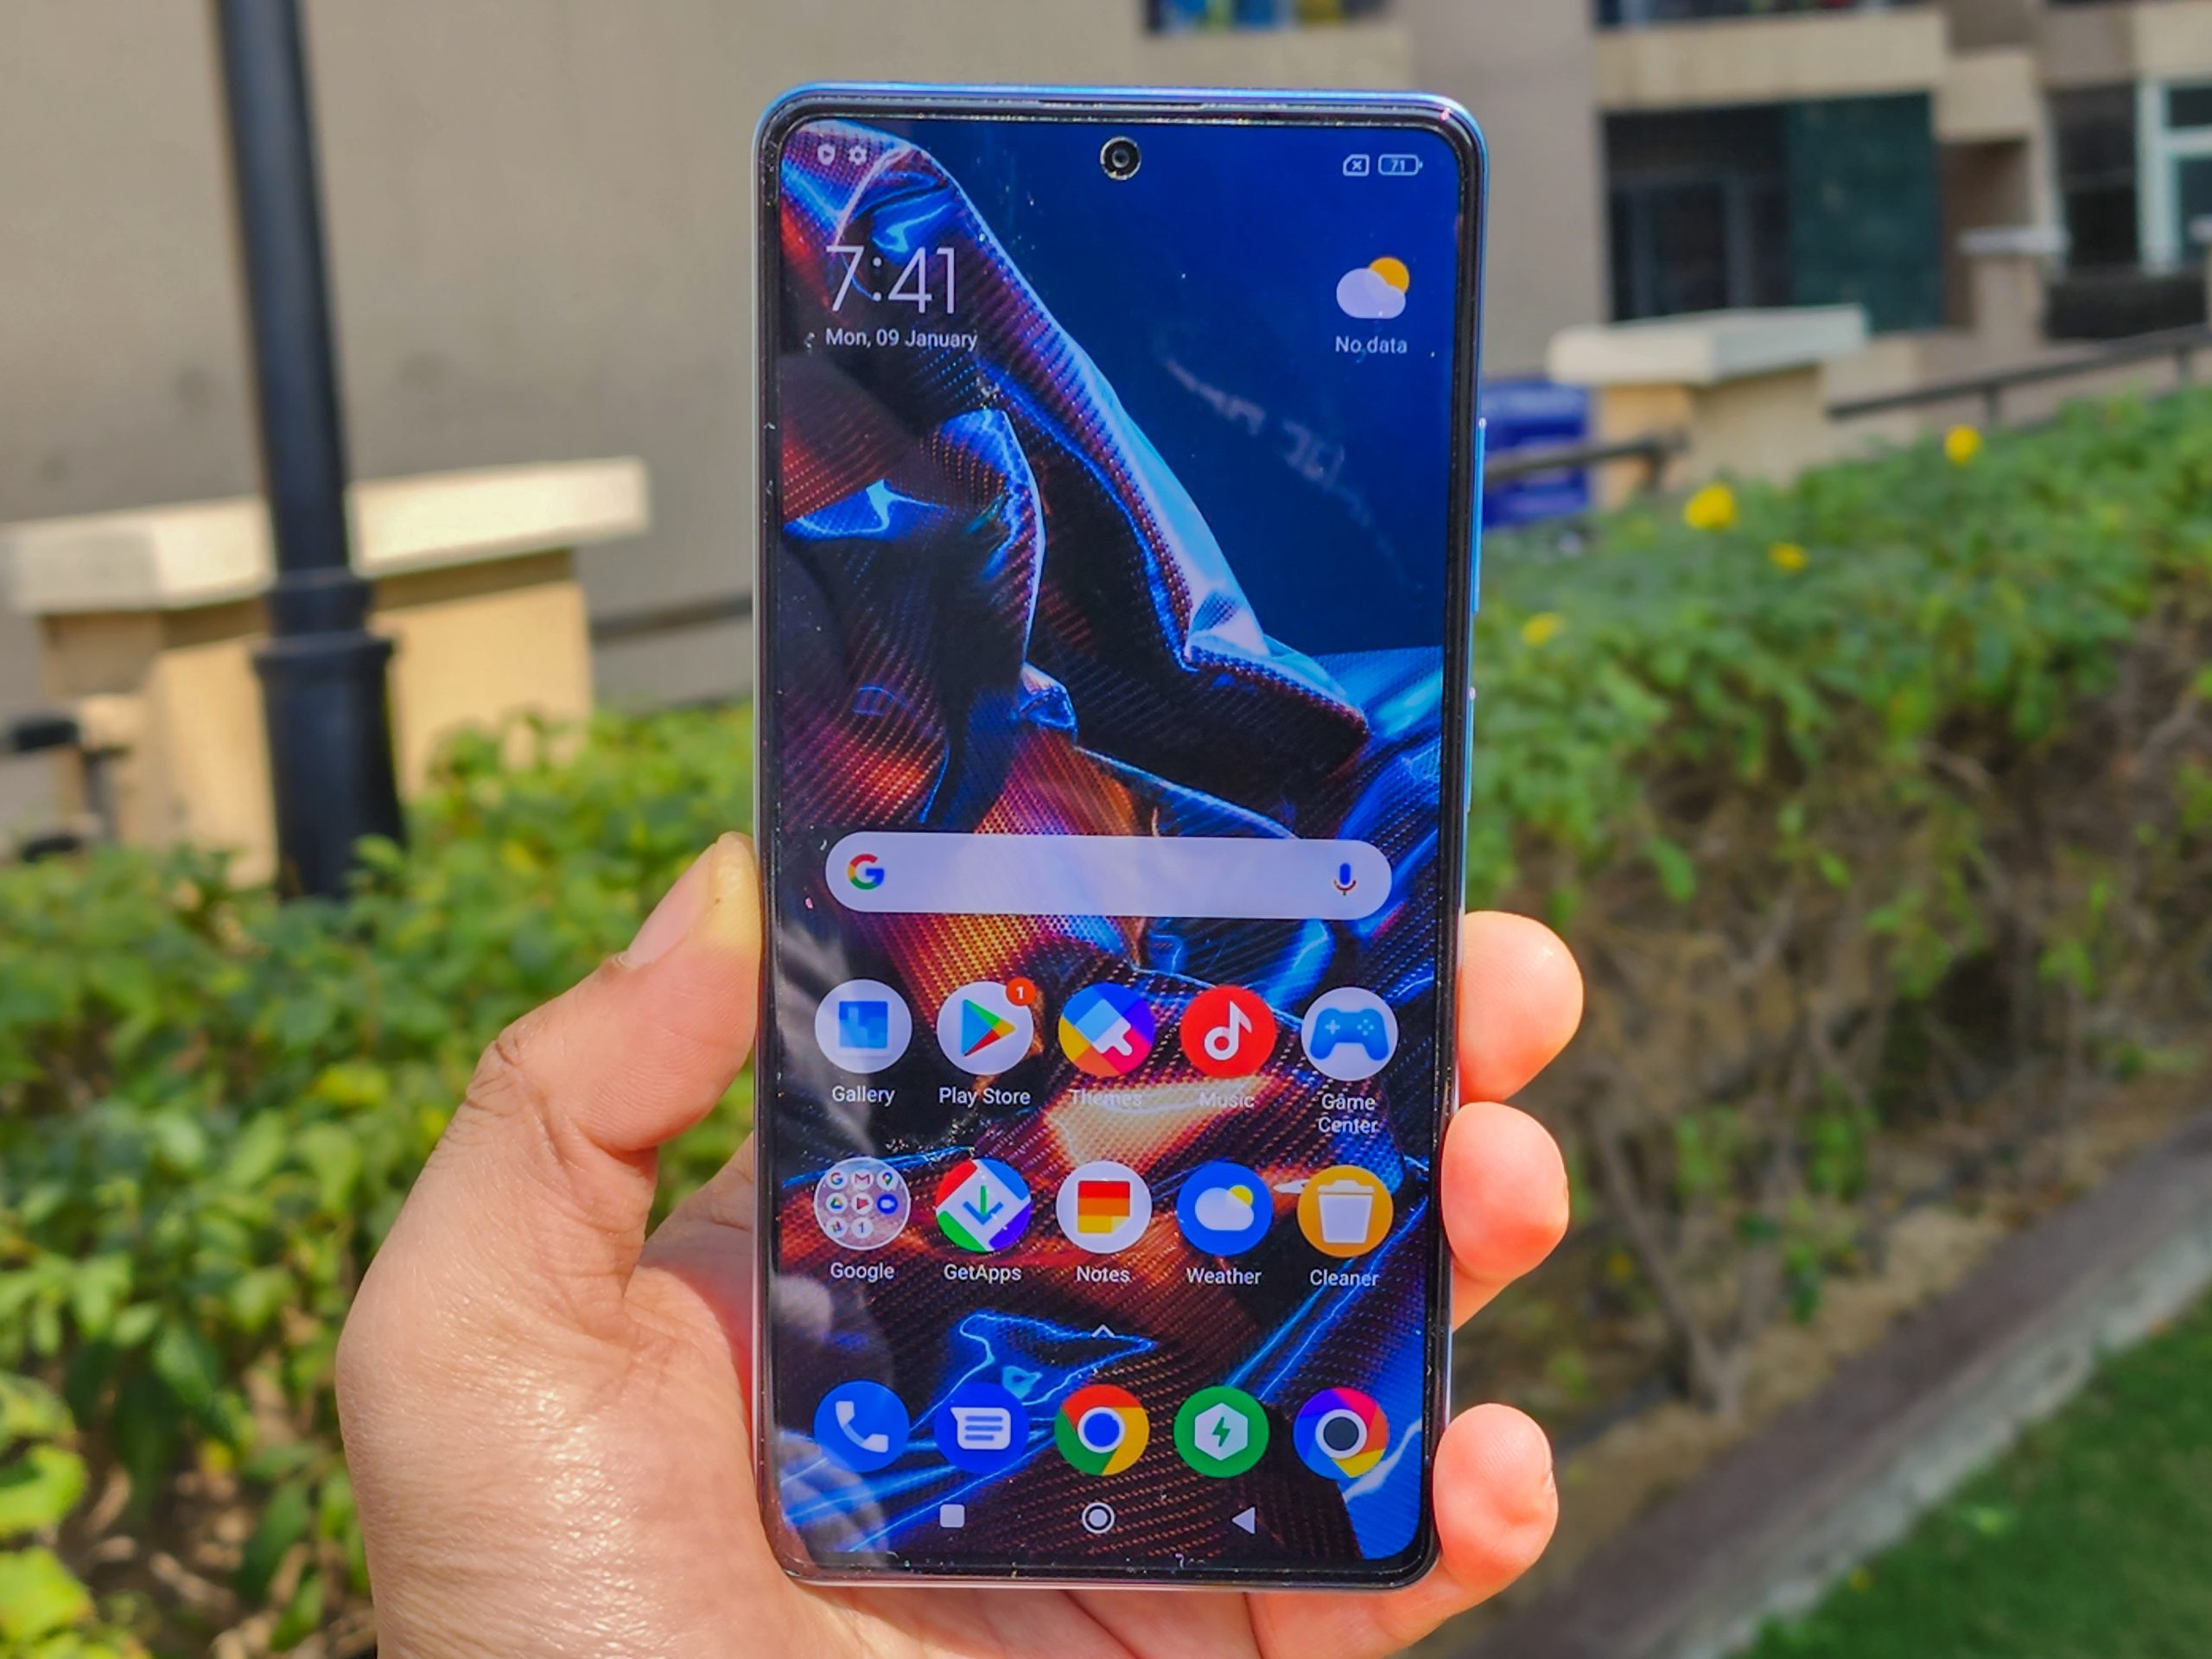 Poco X5 Pro 5G Review: The Complete Package?